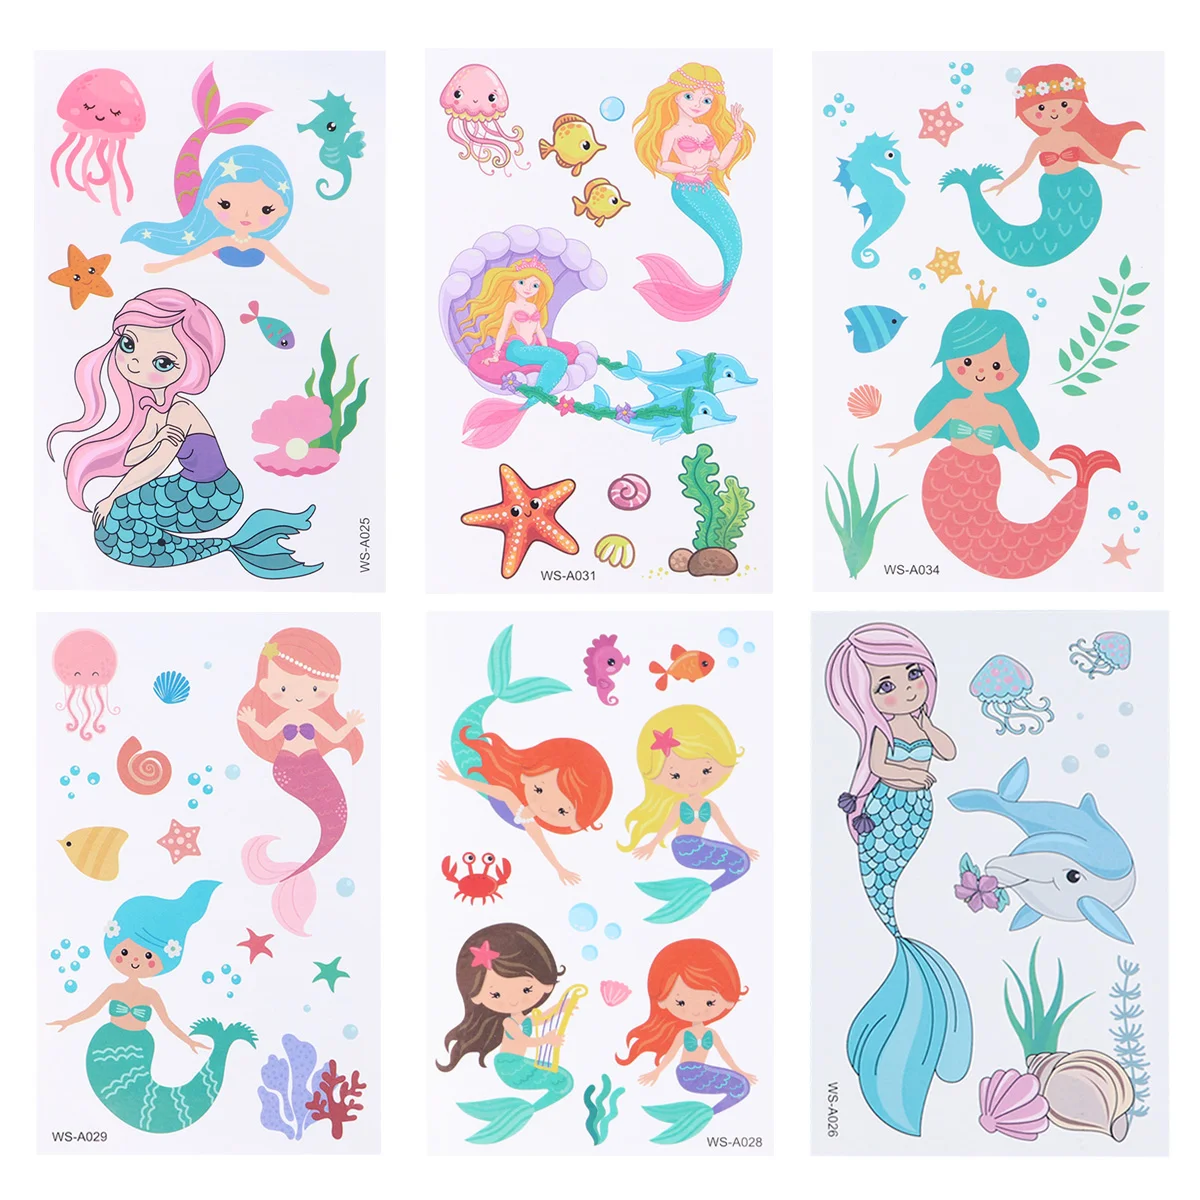 

12 Sheets Tattoos Party Favor Set Body Stickers for Girls Kids Temp Face Tattoos Mermaid Birthday Favors Goodie Bag Stuffers